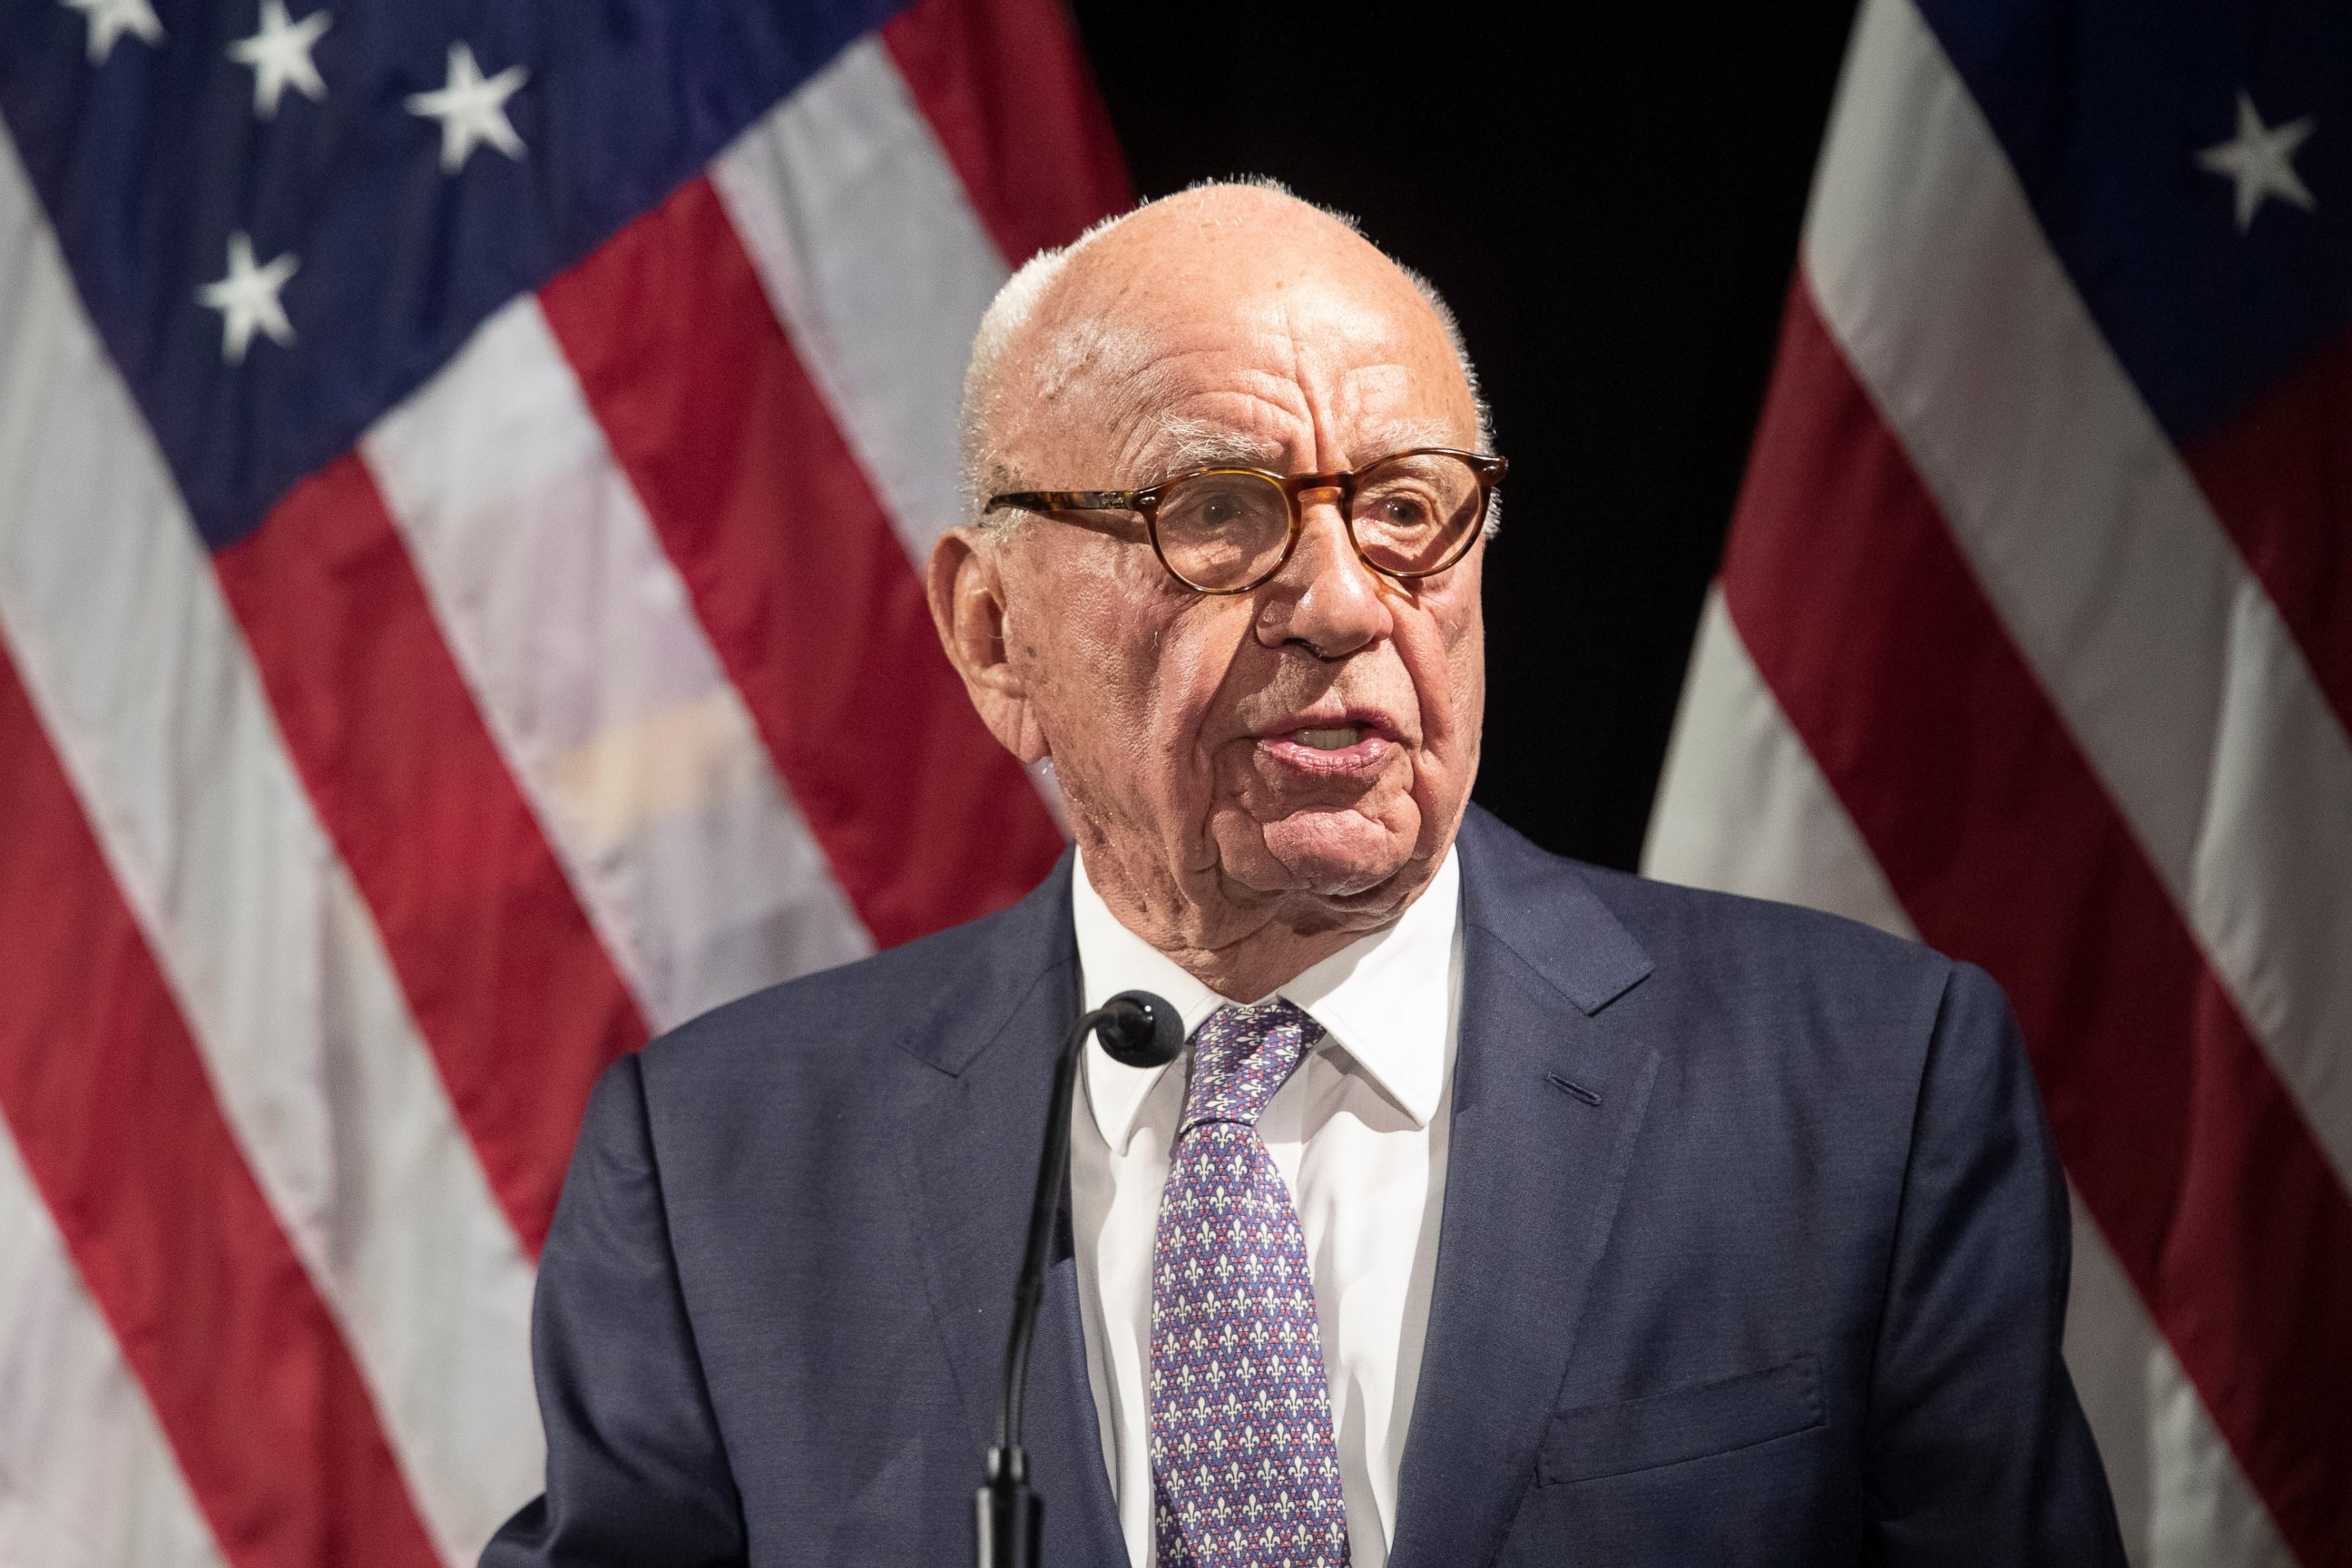 PHOTO: In this Oct. 30, 2018 file photo, Rupert Murdoch introduces Secretary of State Mike Pompeo during the Herman Kahn Award Gala, in New York.